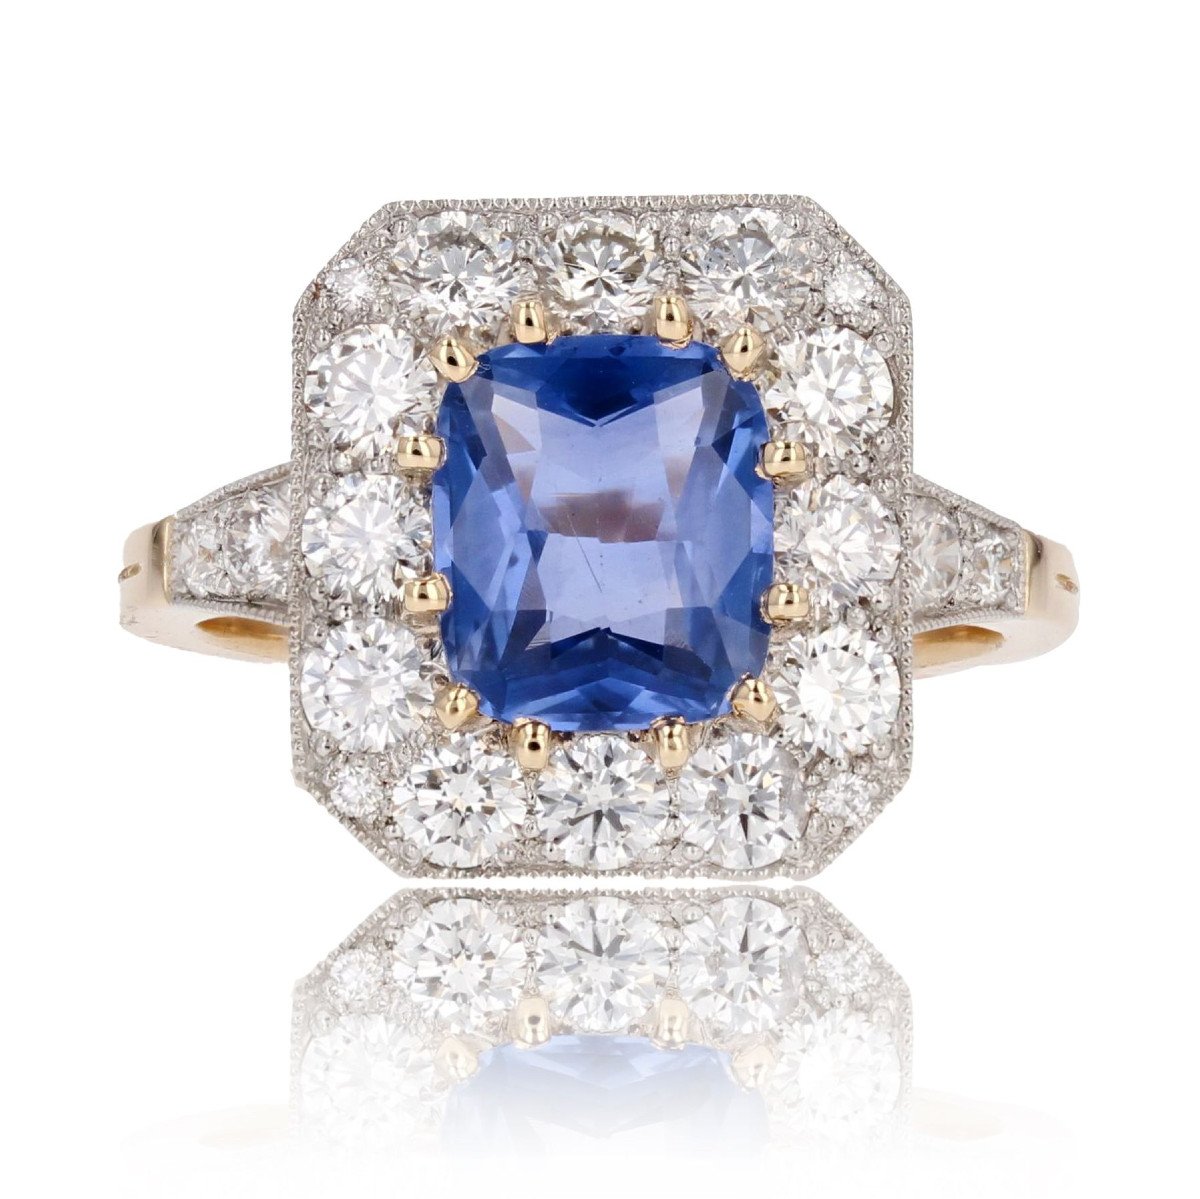 Blue Sapphire And Diamonds Art Deco Style Ring